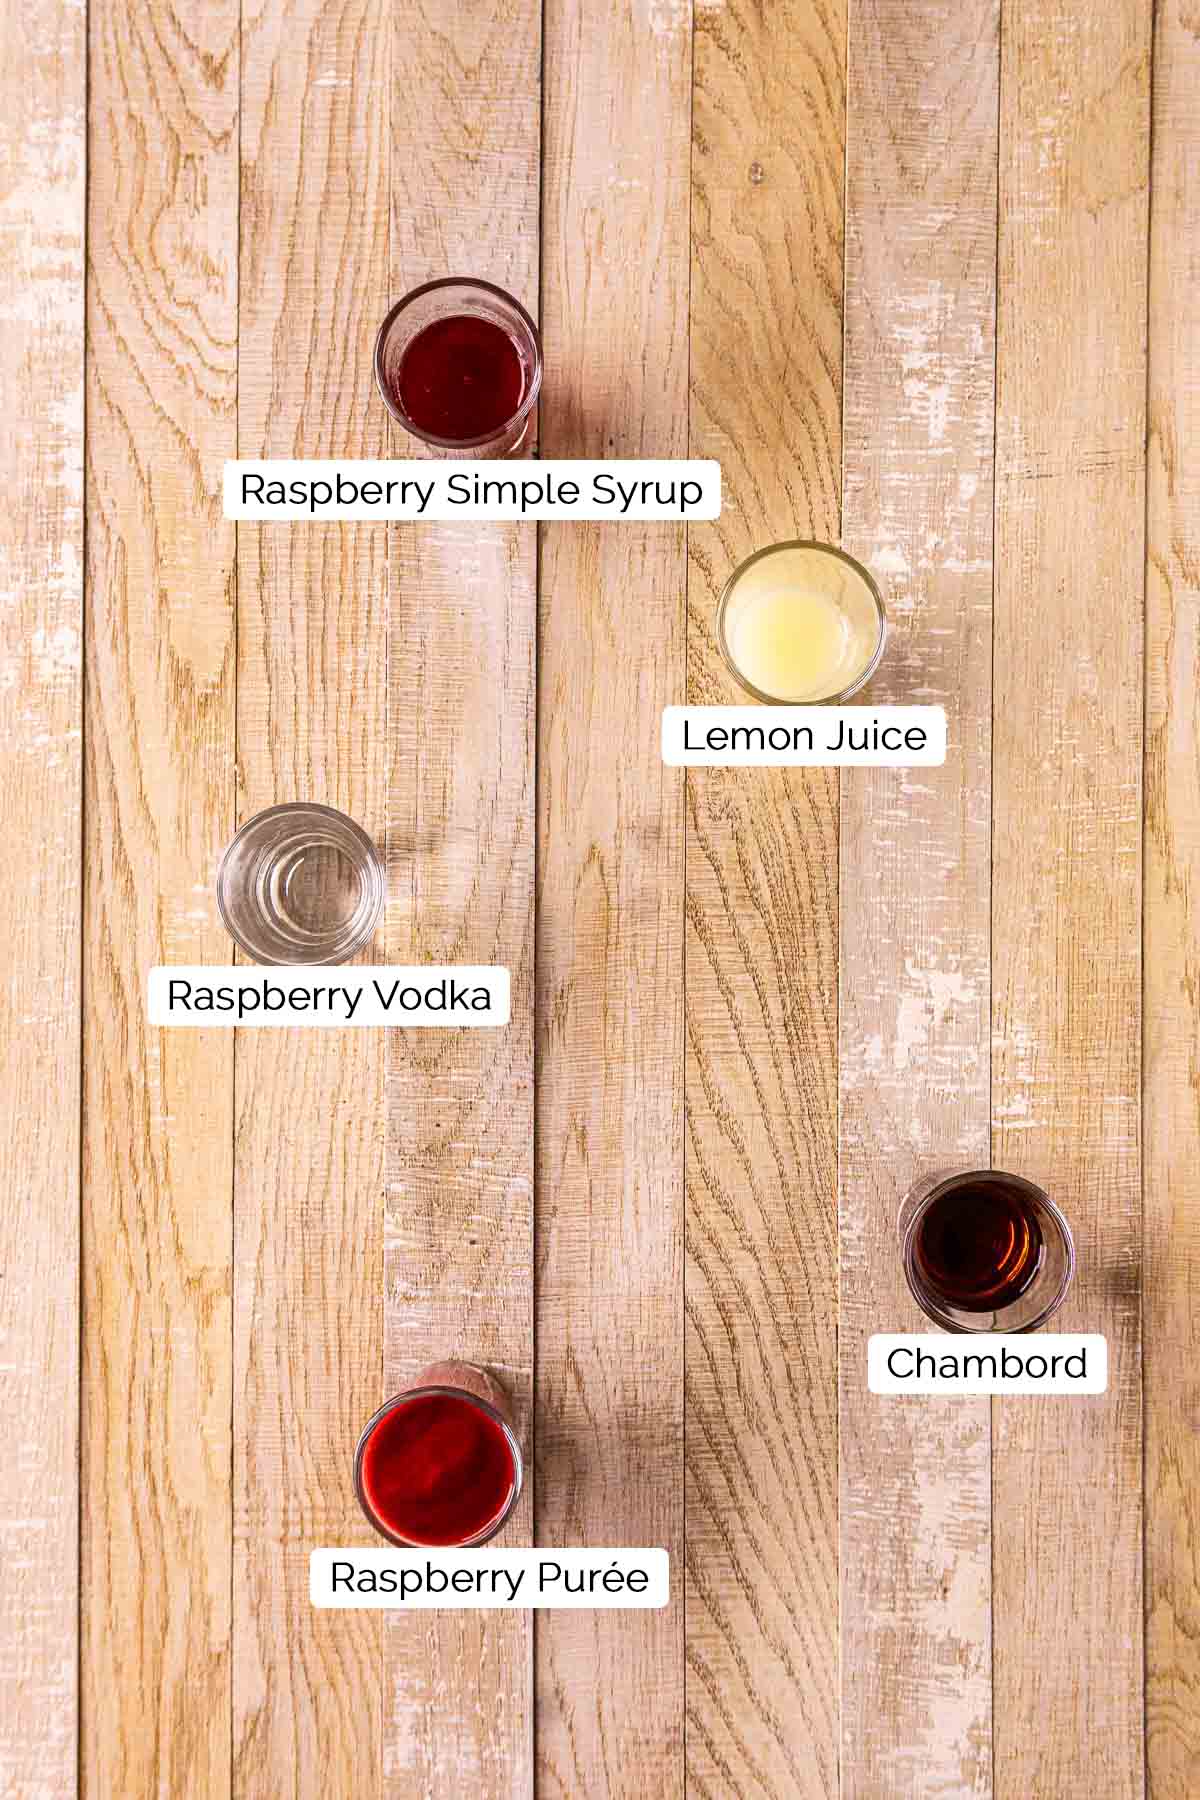 The drink ingredients with black and white labels on a cream-colored wooden board.